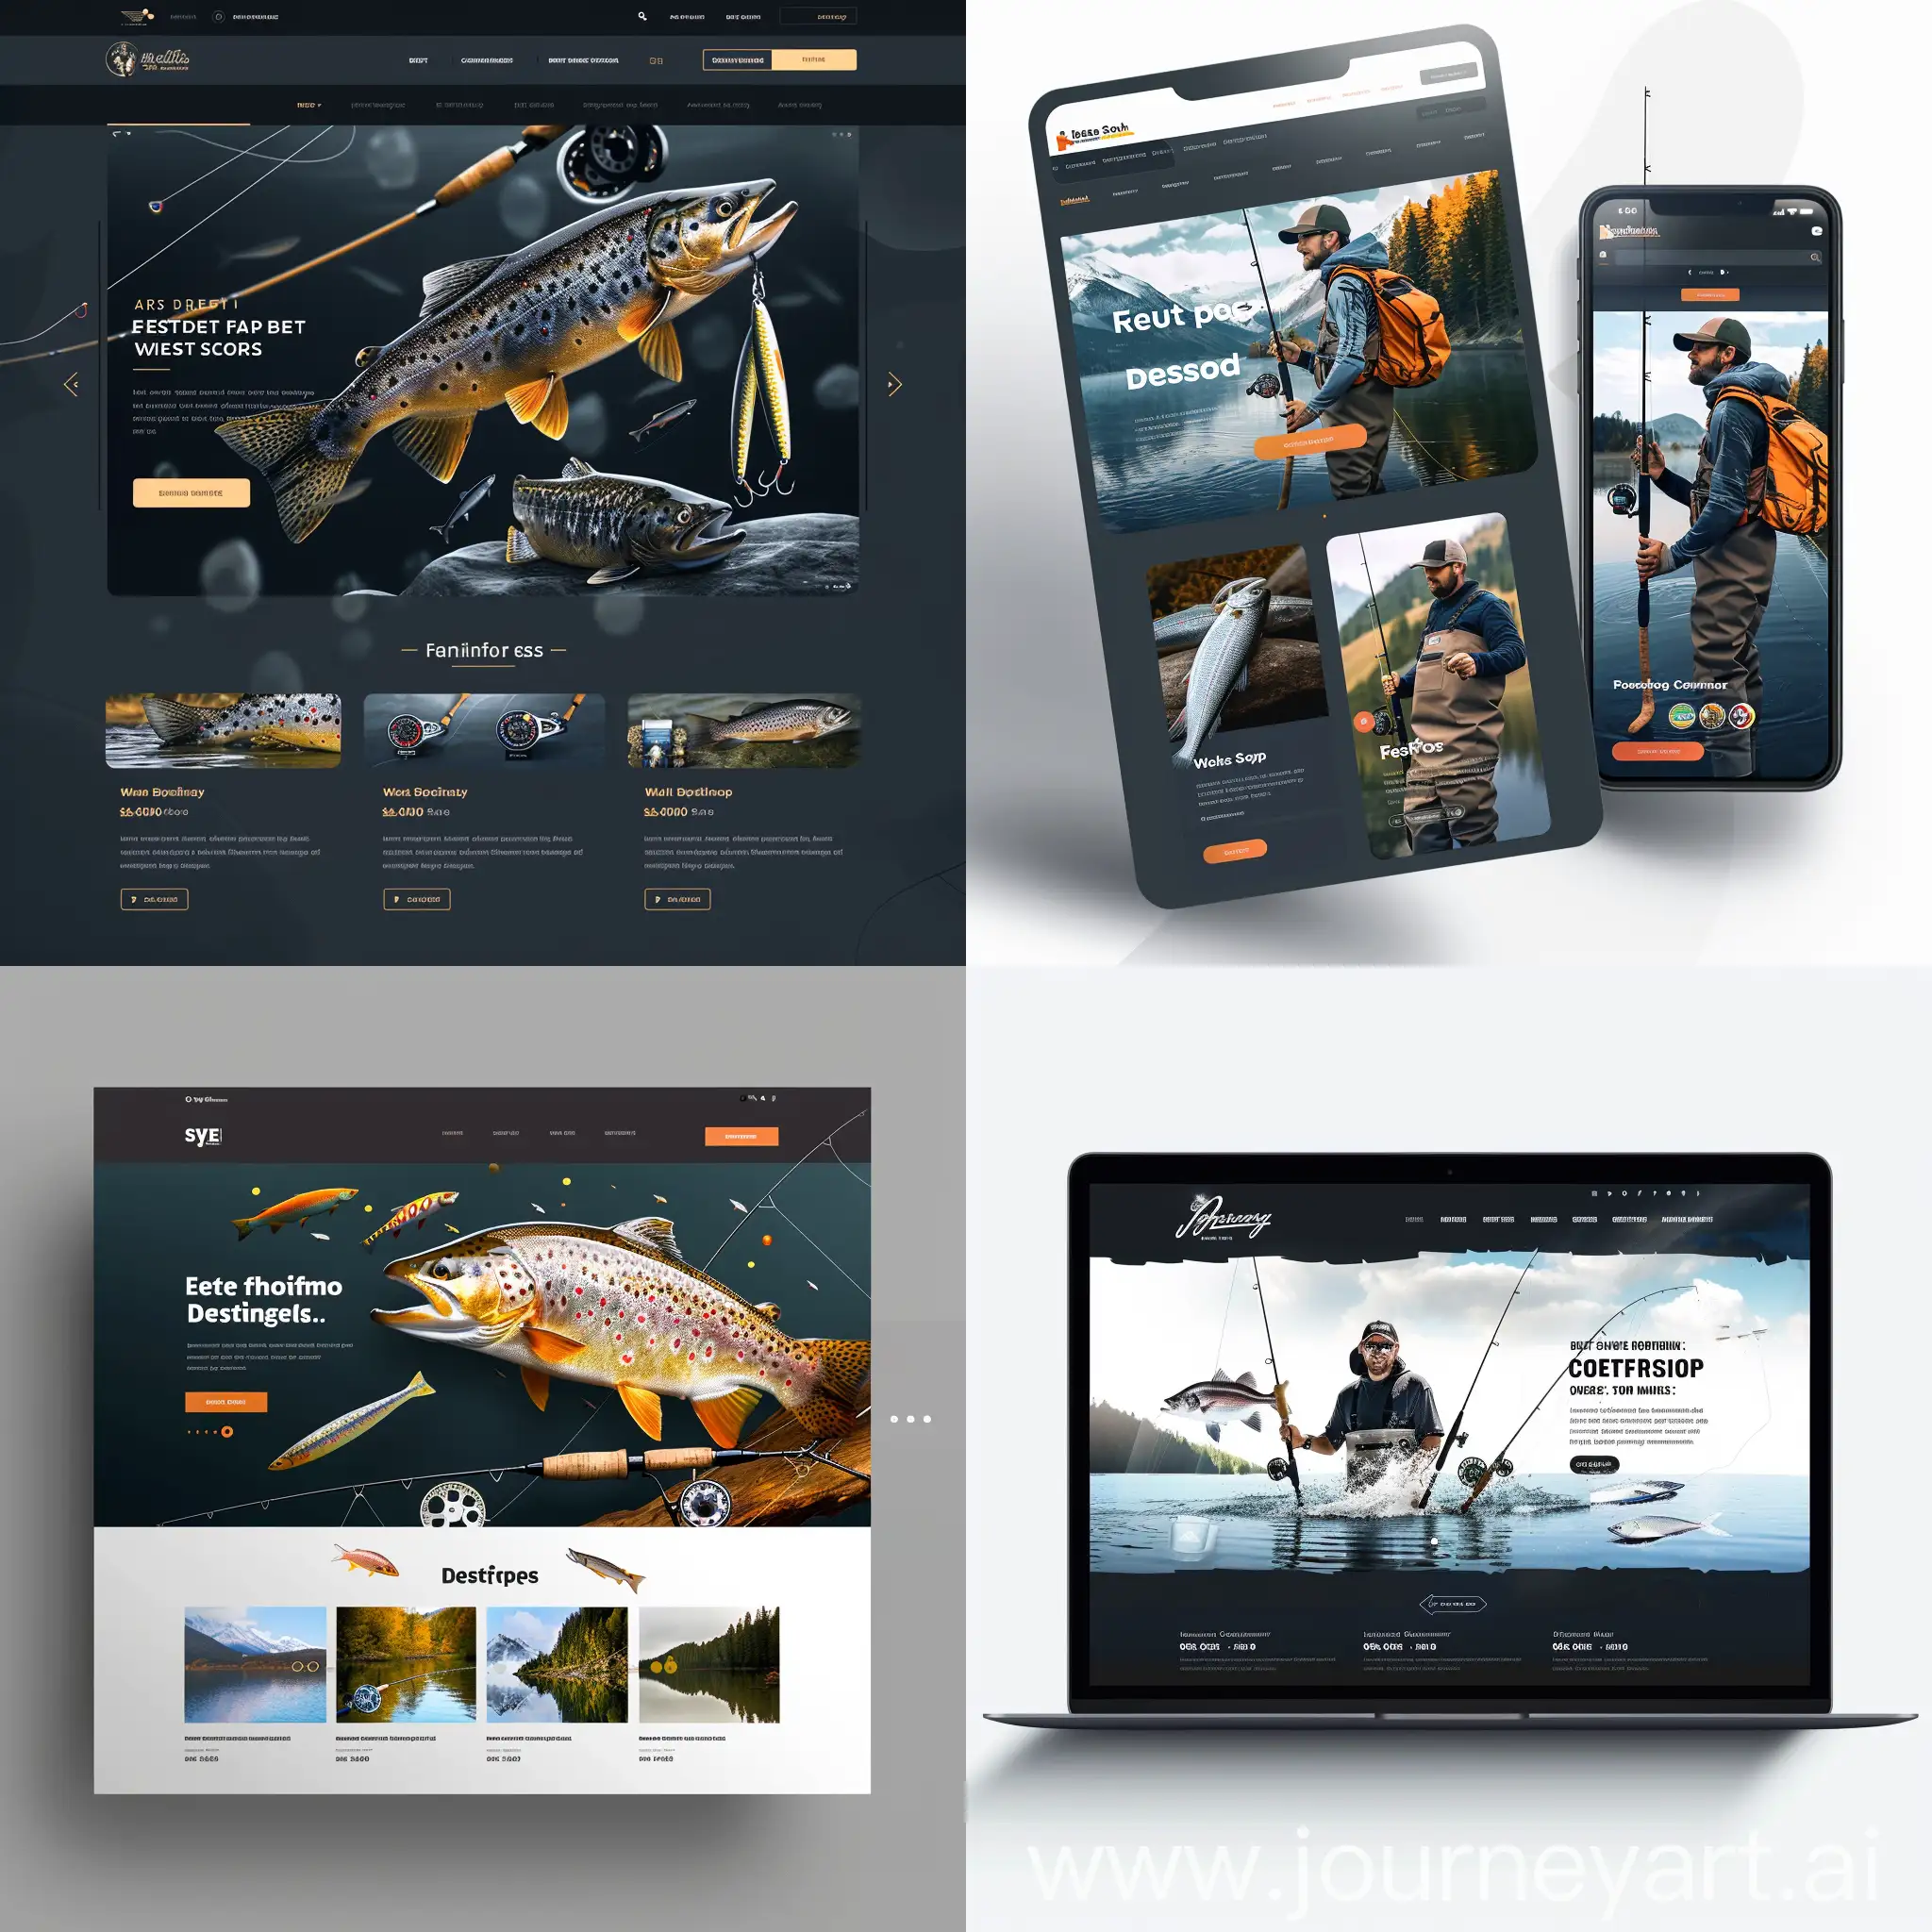 create a mock-up of a fishing store website. Behave like the best graphic designer